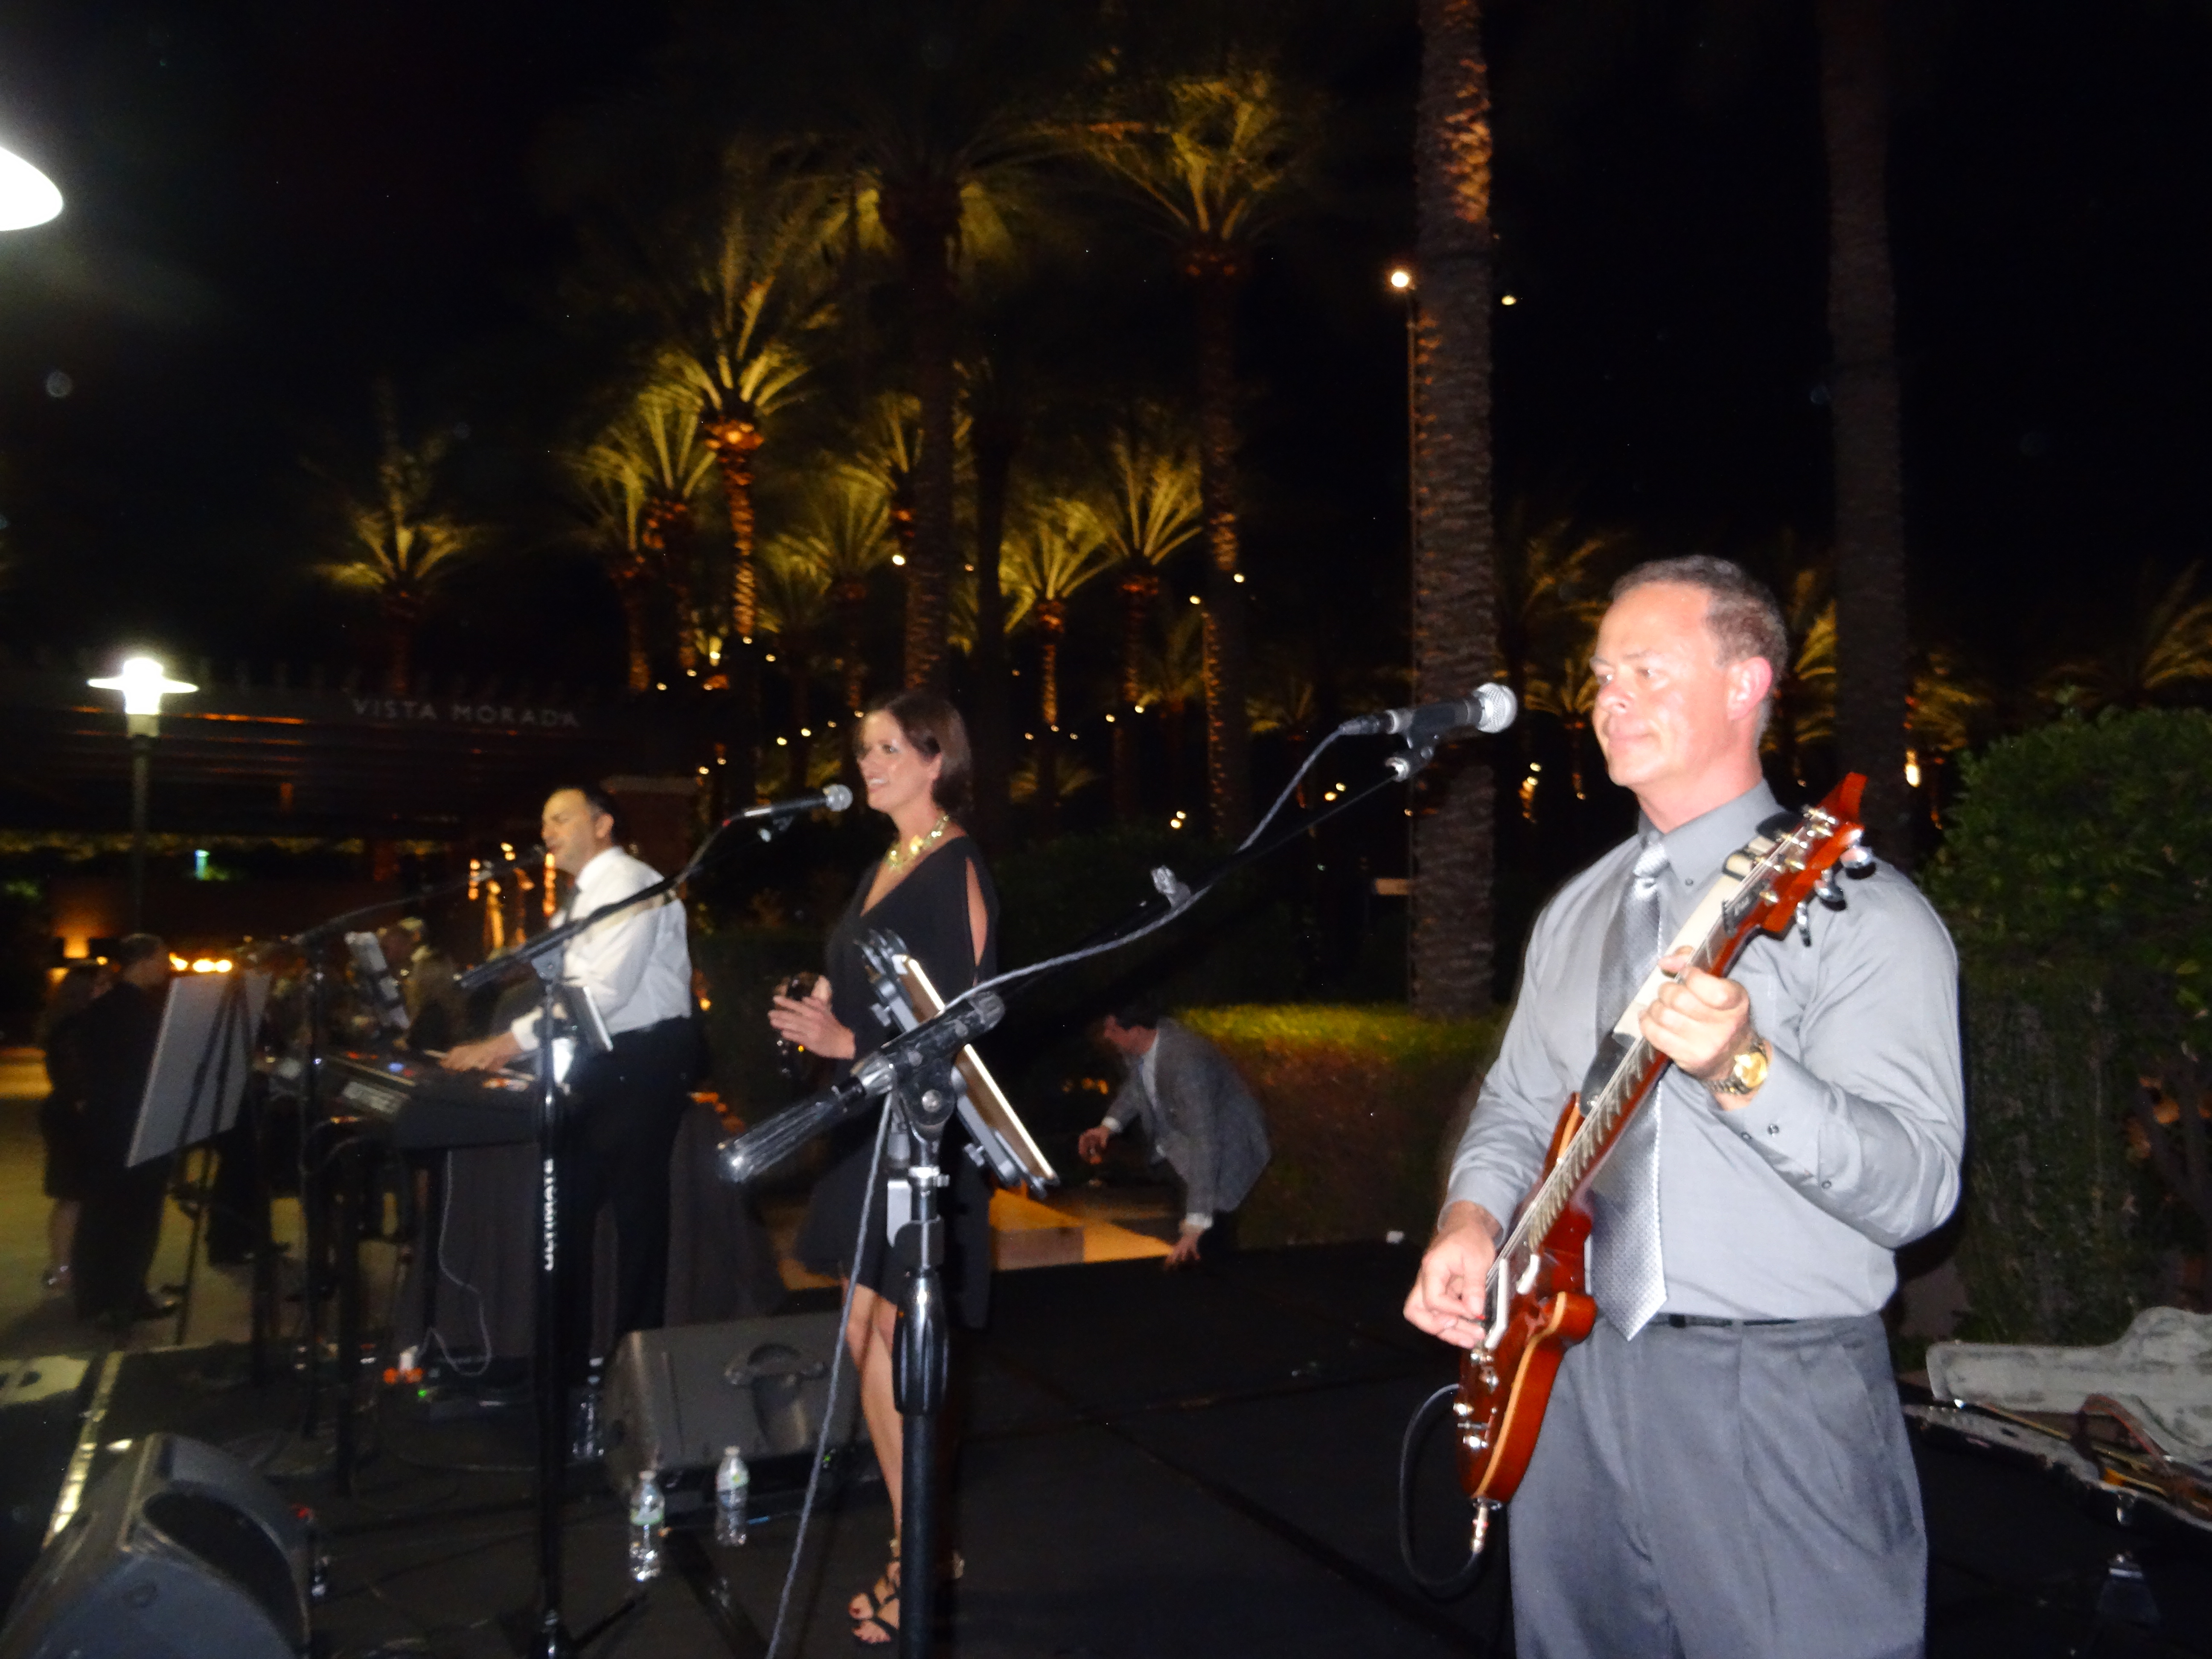 Exit Row Band, Holly Marie, and Sarah McLachlan entertainment for Pulse of the City Soiree